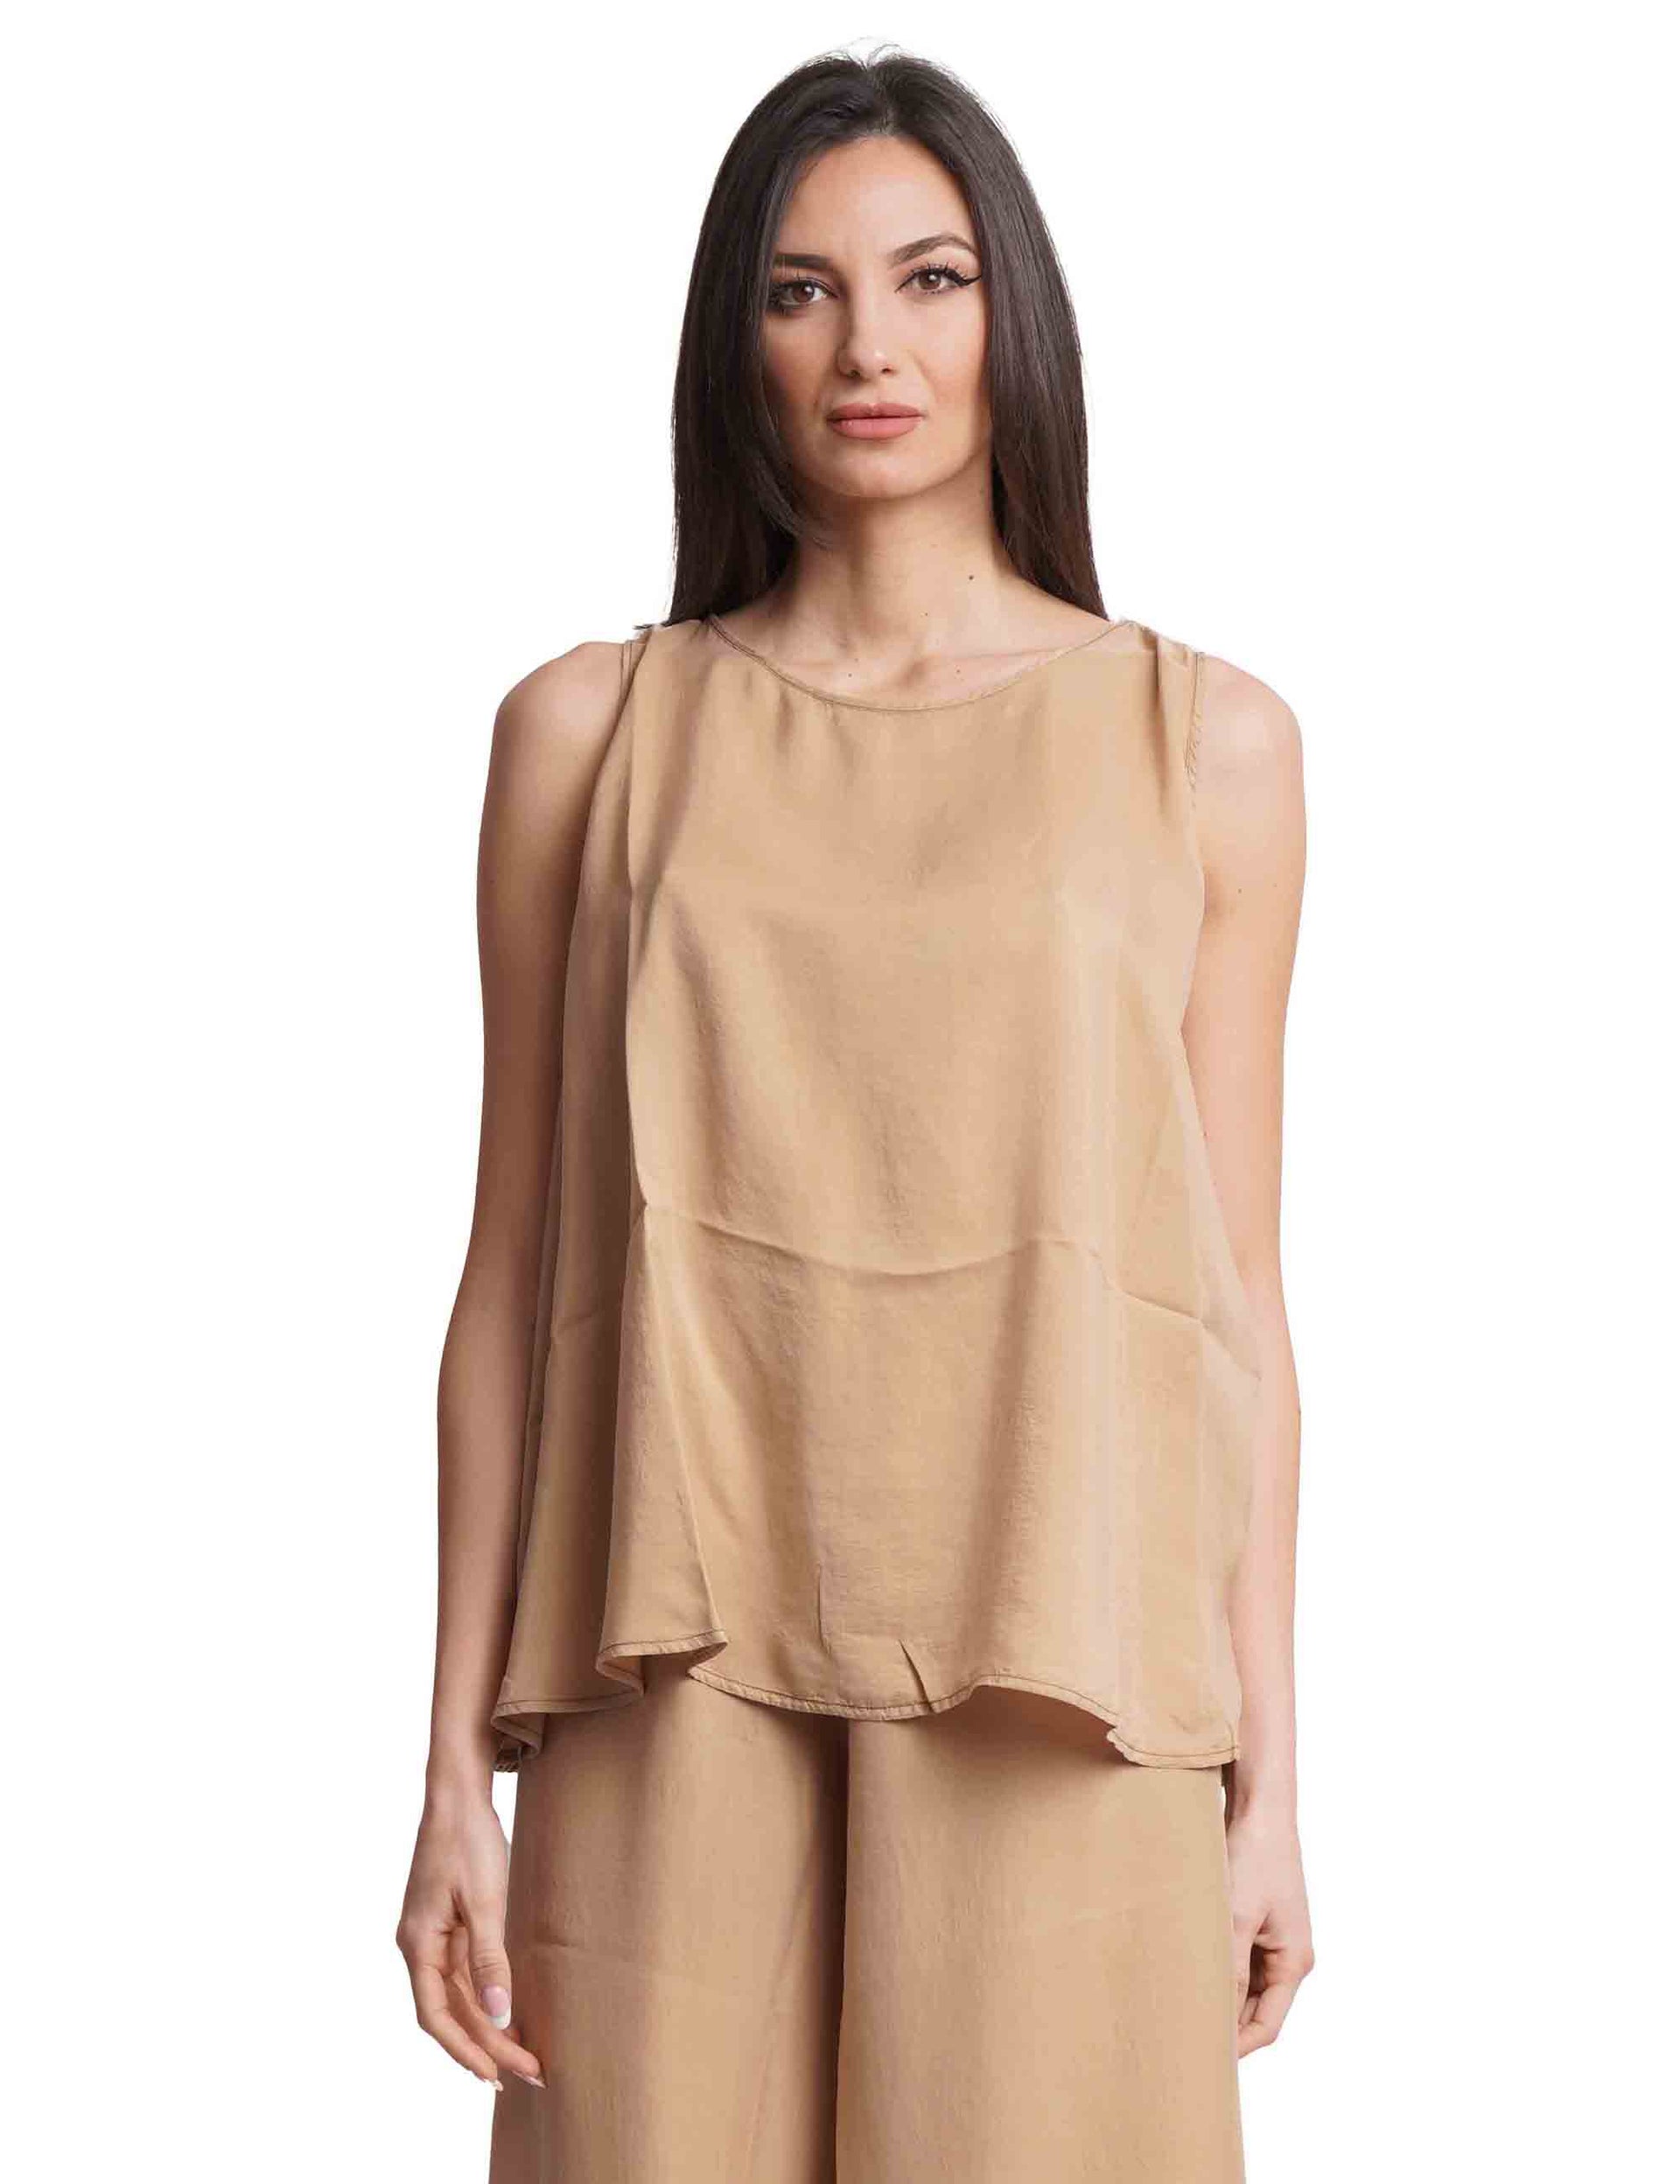 Women's camel silk top wide at the bottom